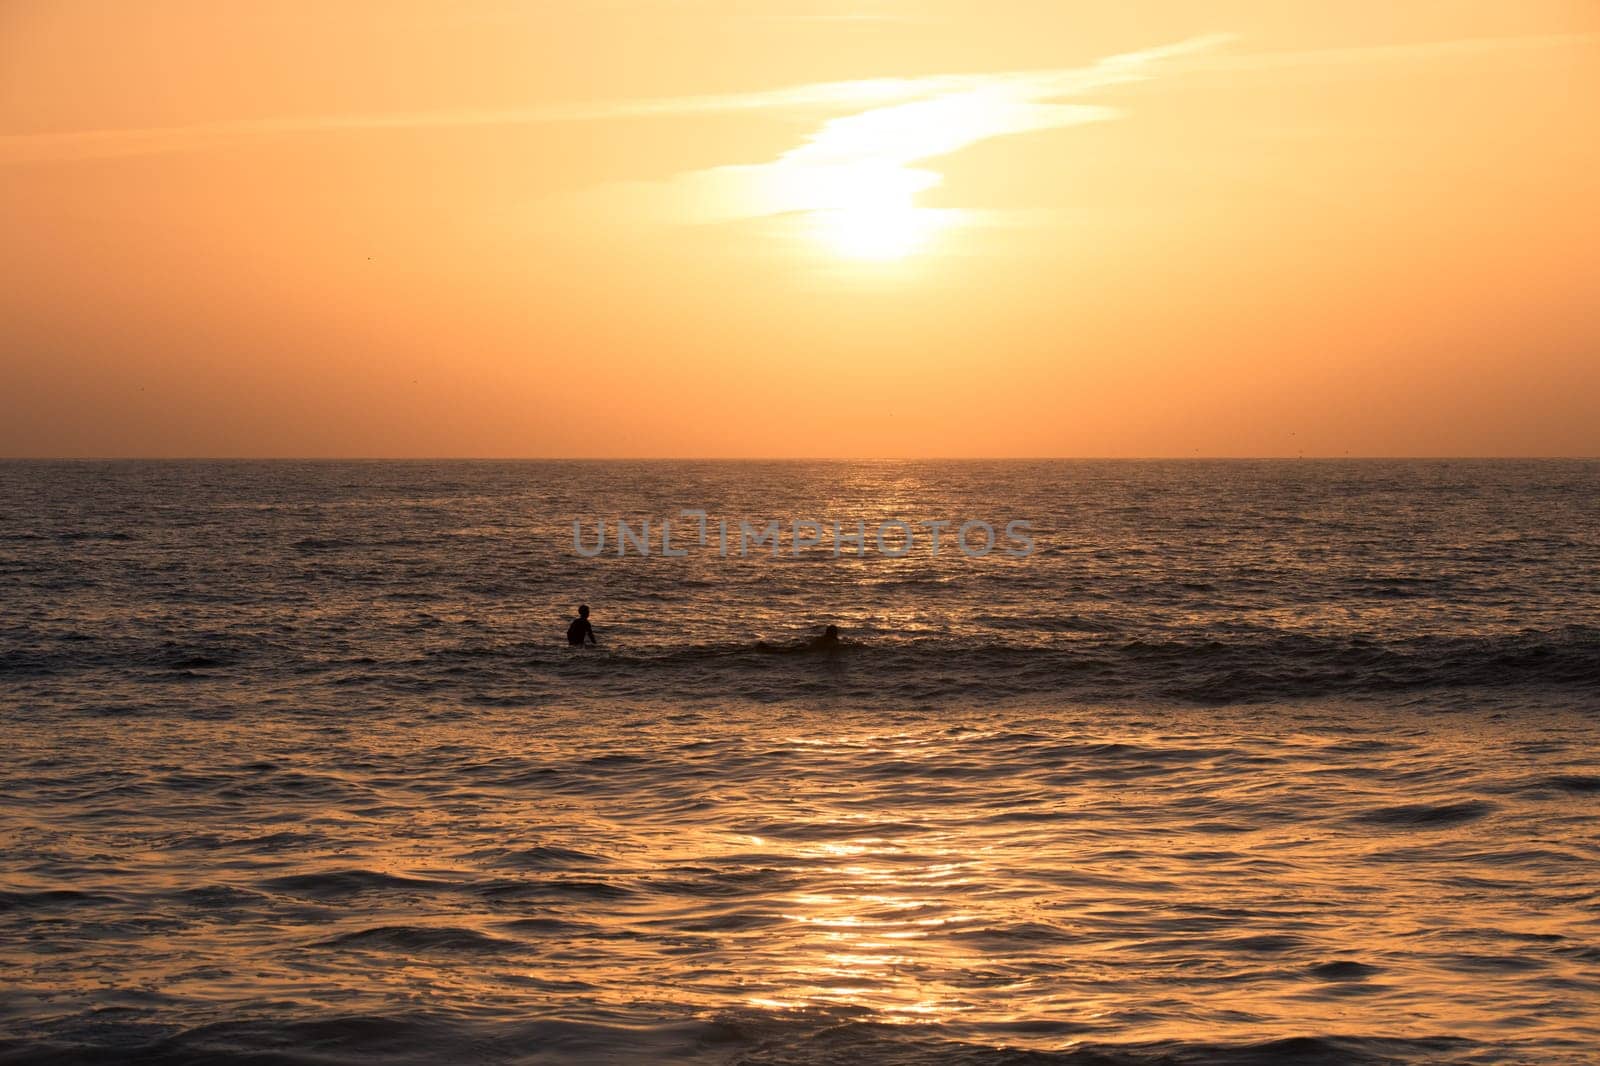 Surfer silhouettes in the ocean at sunset by homydesign